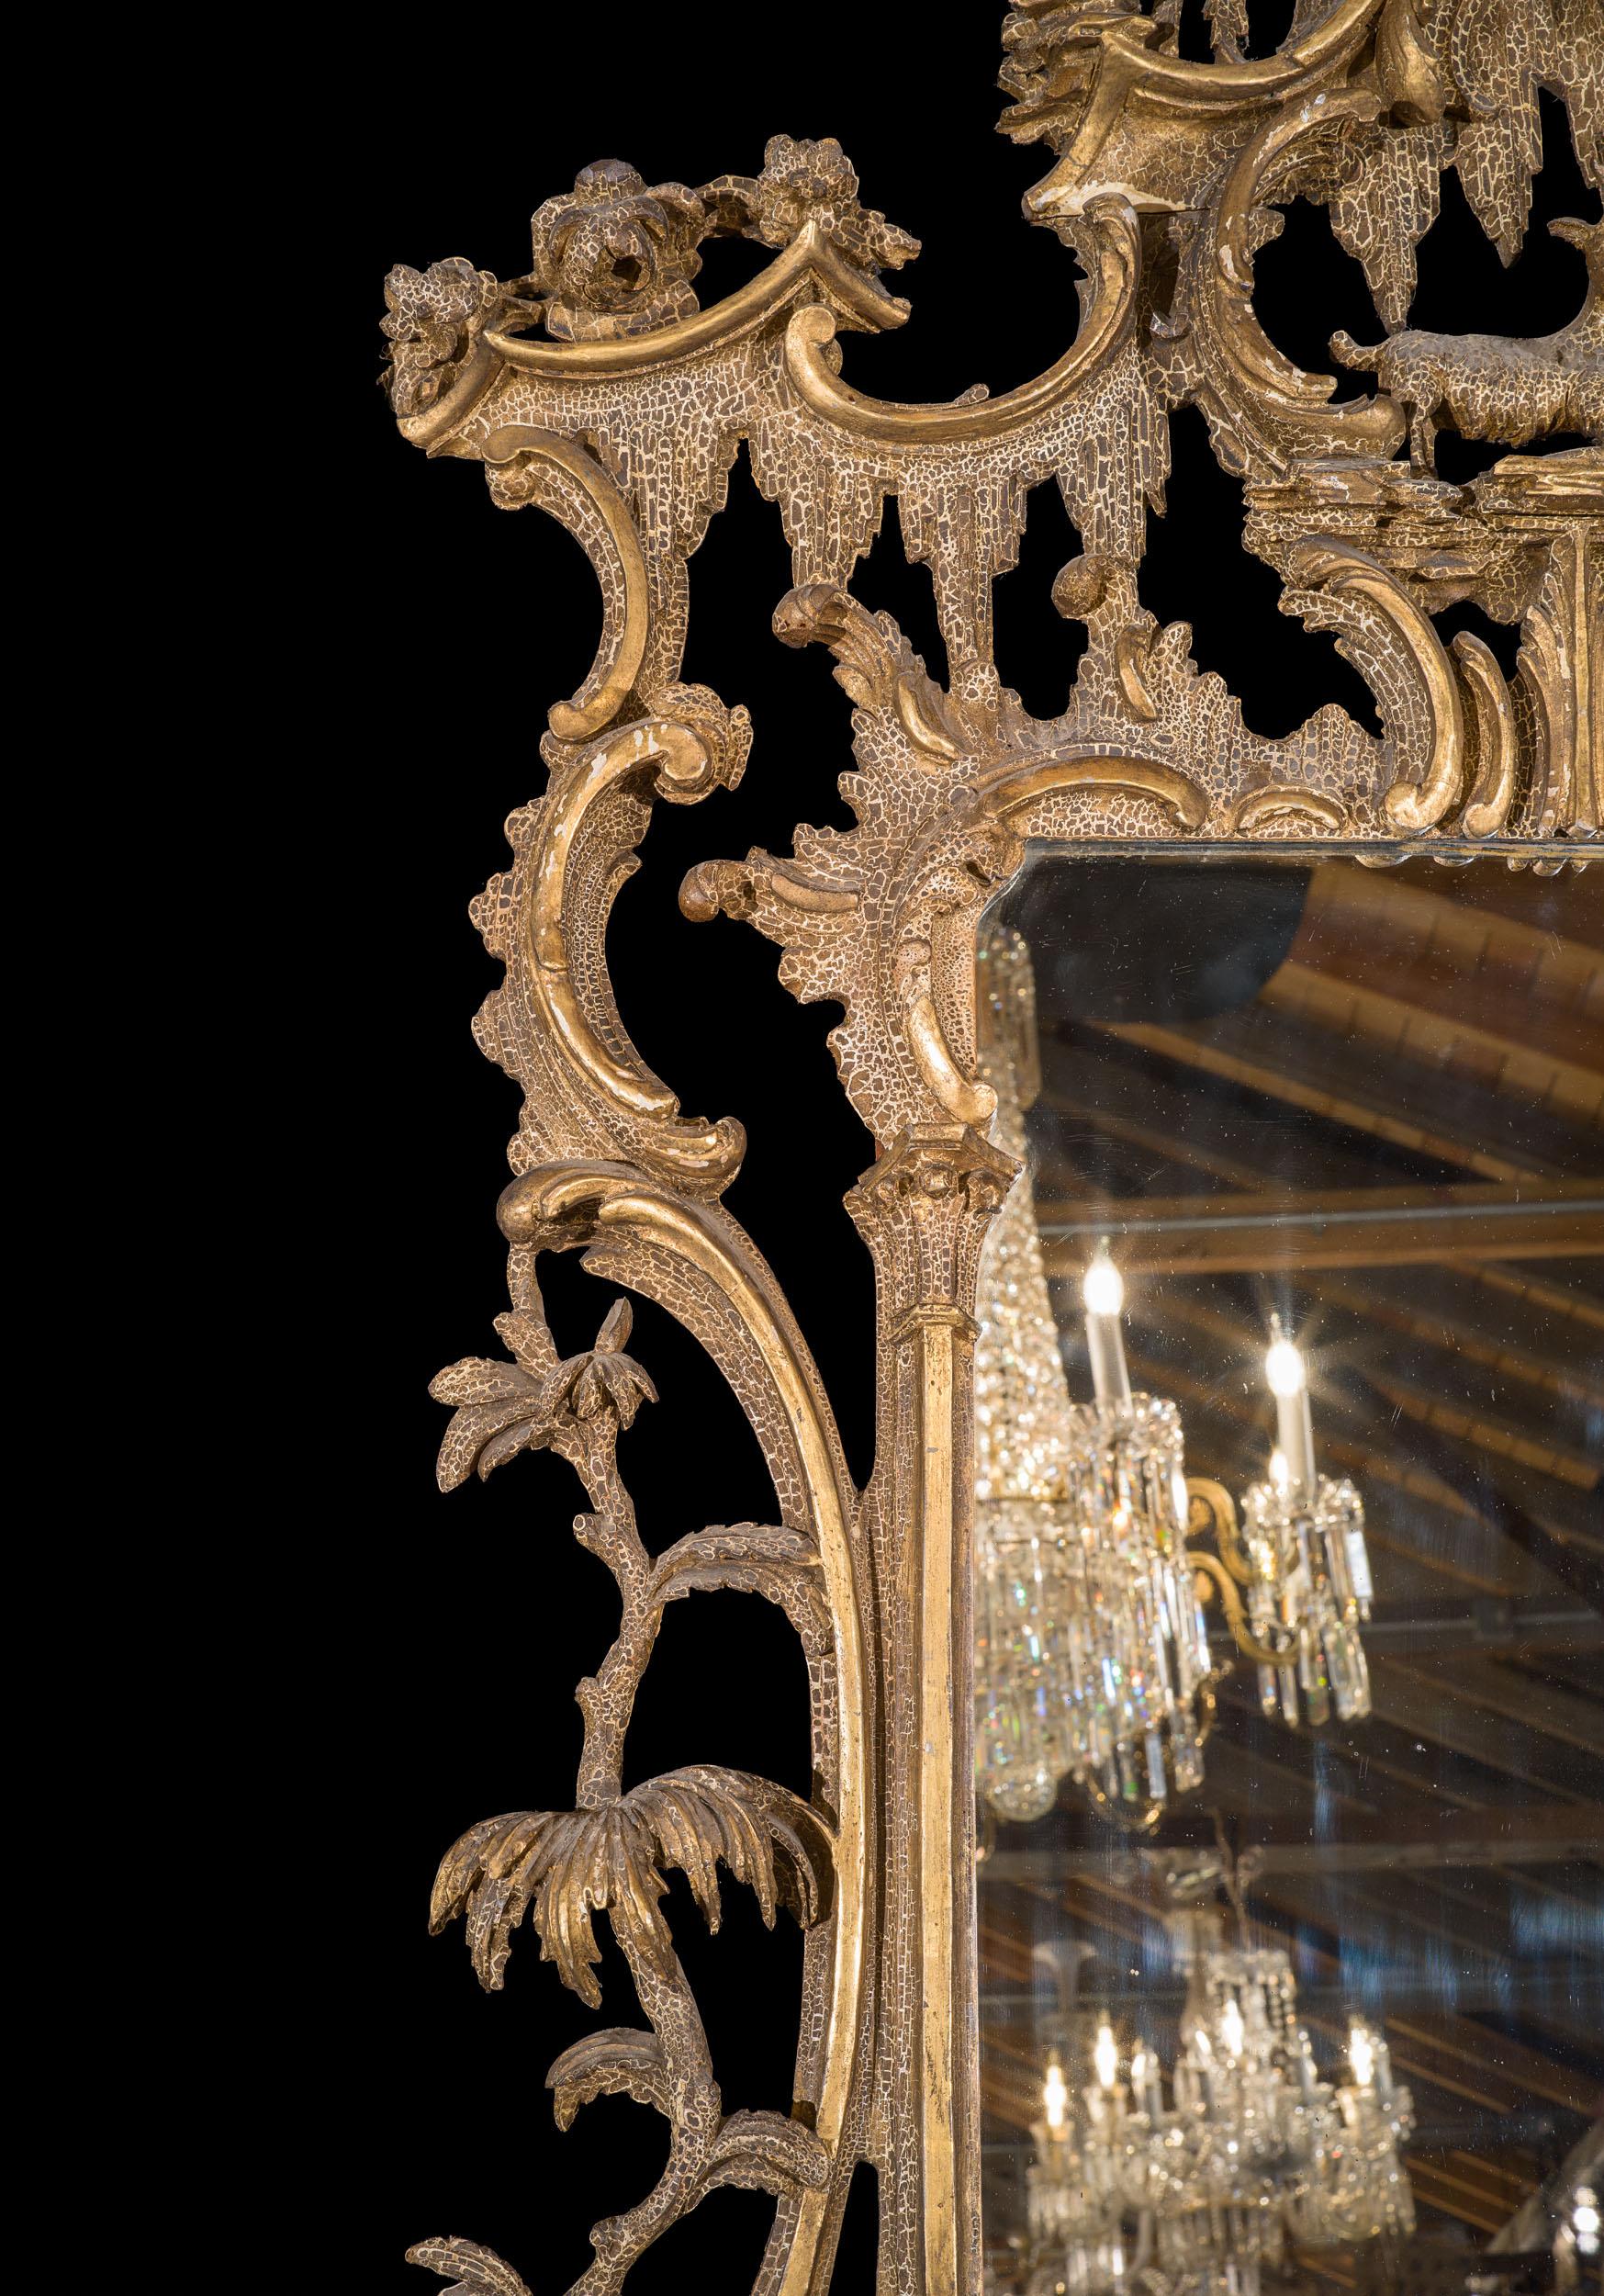 A grand giltwood wall mirror in the manner of Thomas Johnson with a Rococo frame comprising c scrolls and foliate flourishes and surmounted by a ho-ho bird. A detail typical of Thomas Johnson is the inclusion of an animal, and here a goat teeters on